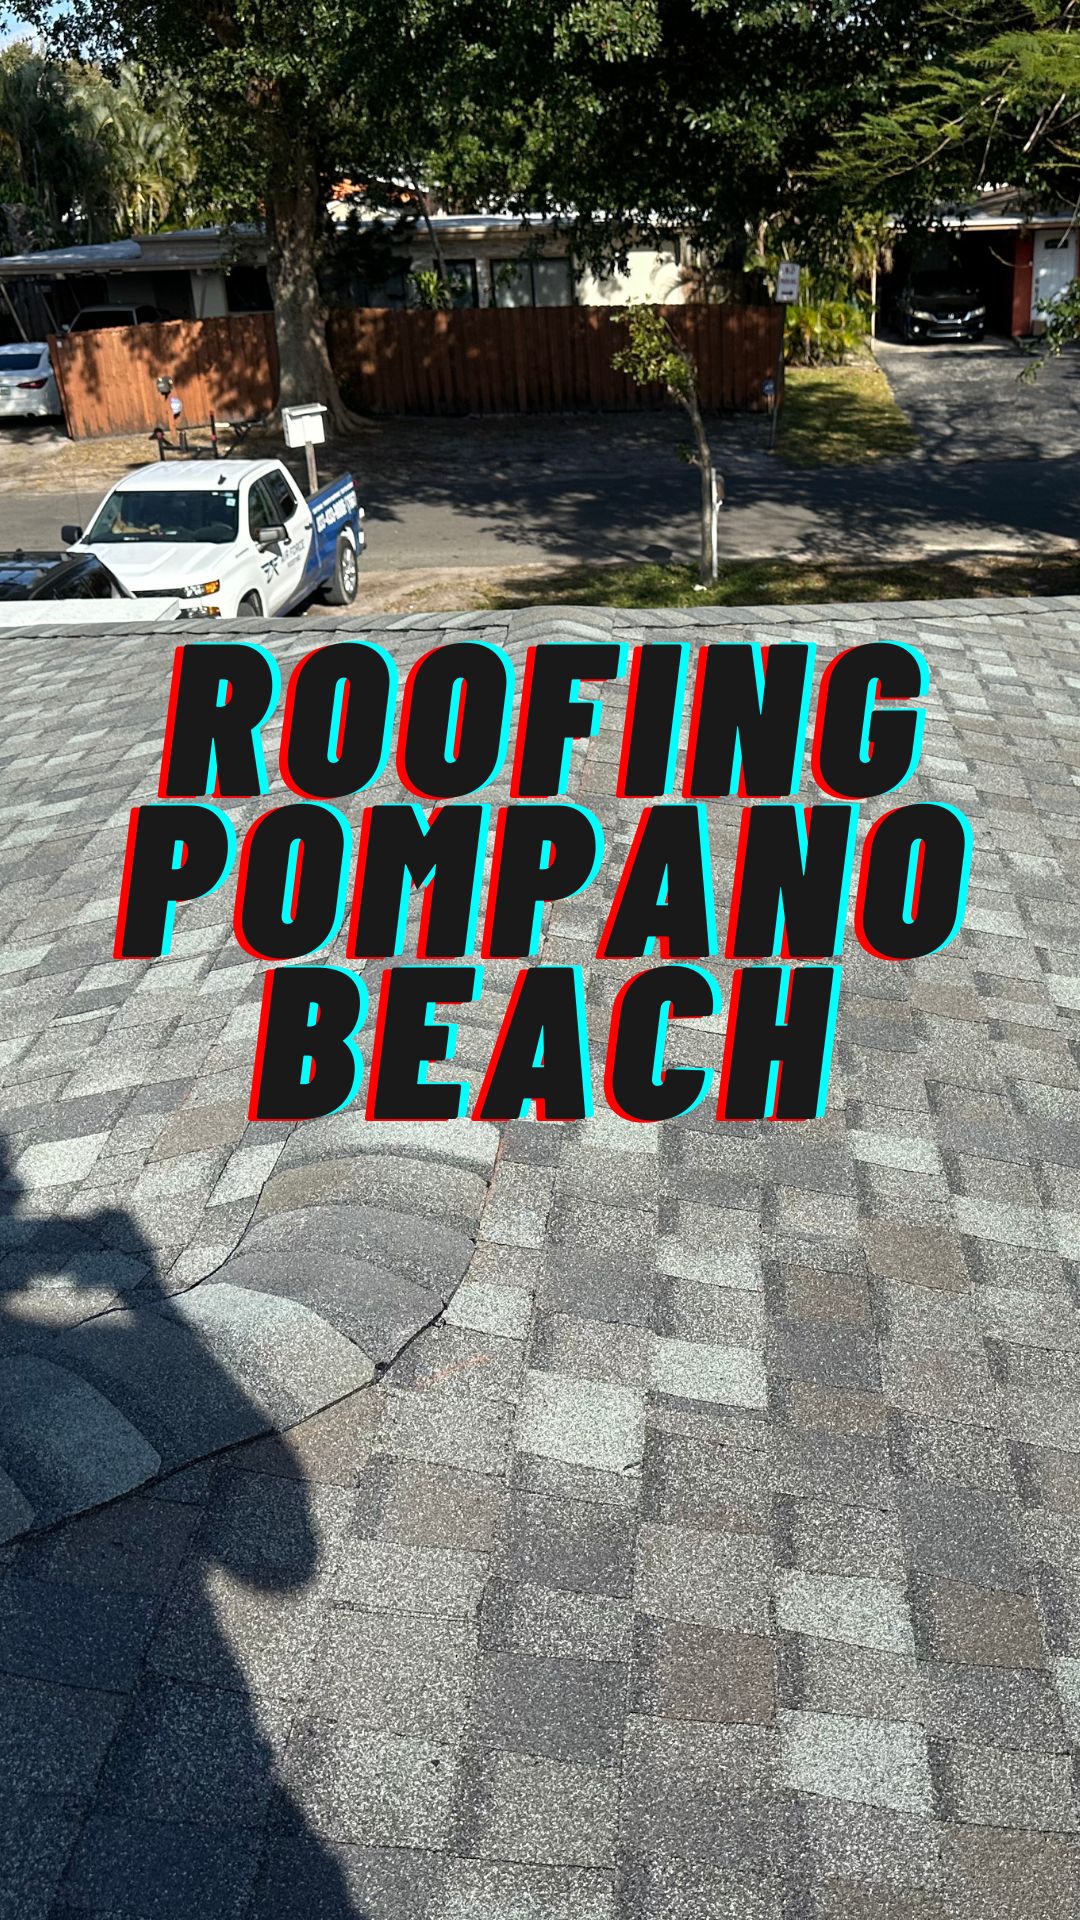 Air Force Roofing Warns Pompano Beach Residents About Summer Roof Damage Local Roofing Expert Shares Insights on Protecting Homes from Florida's Harsh Heat